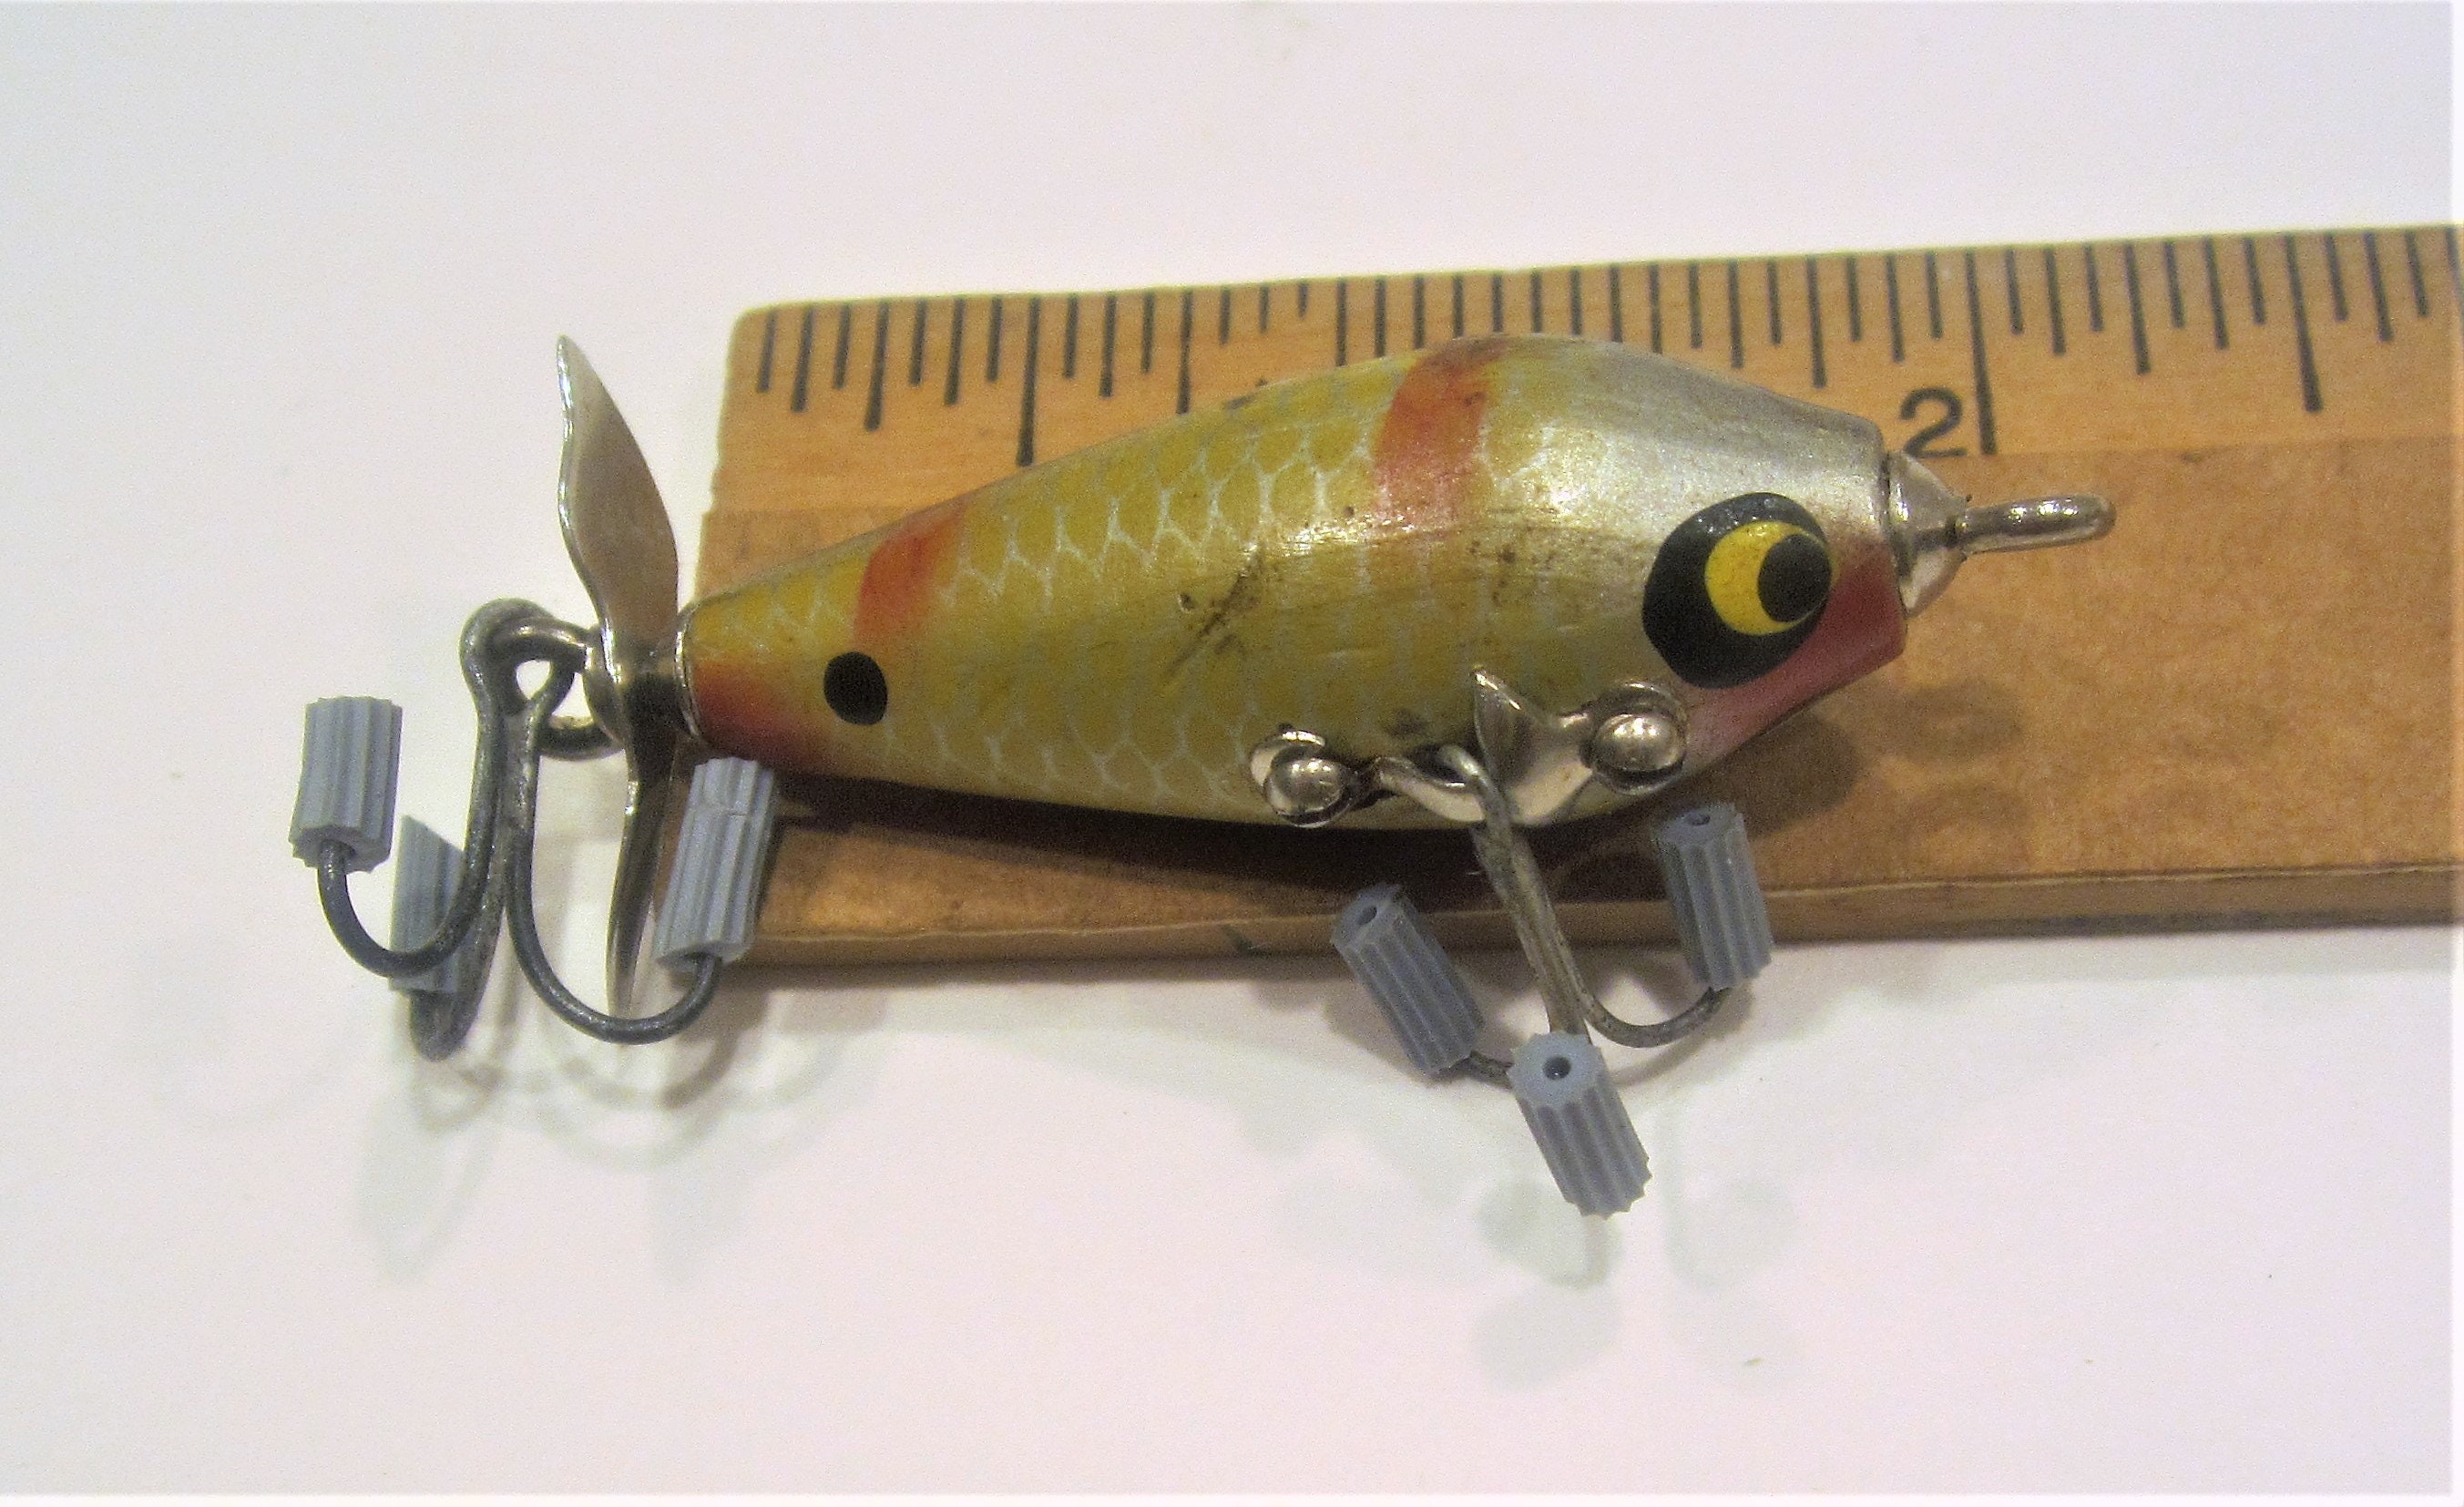 Heddon Basser Lure With Flap Rig Hook Attachment -  Canada